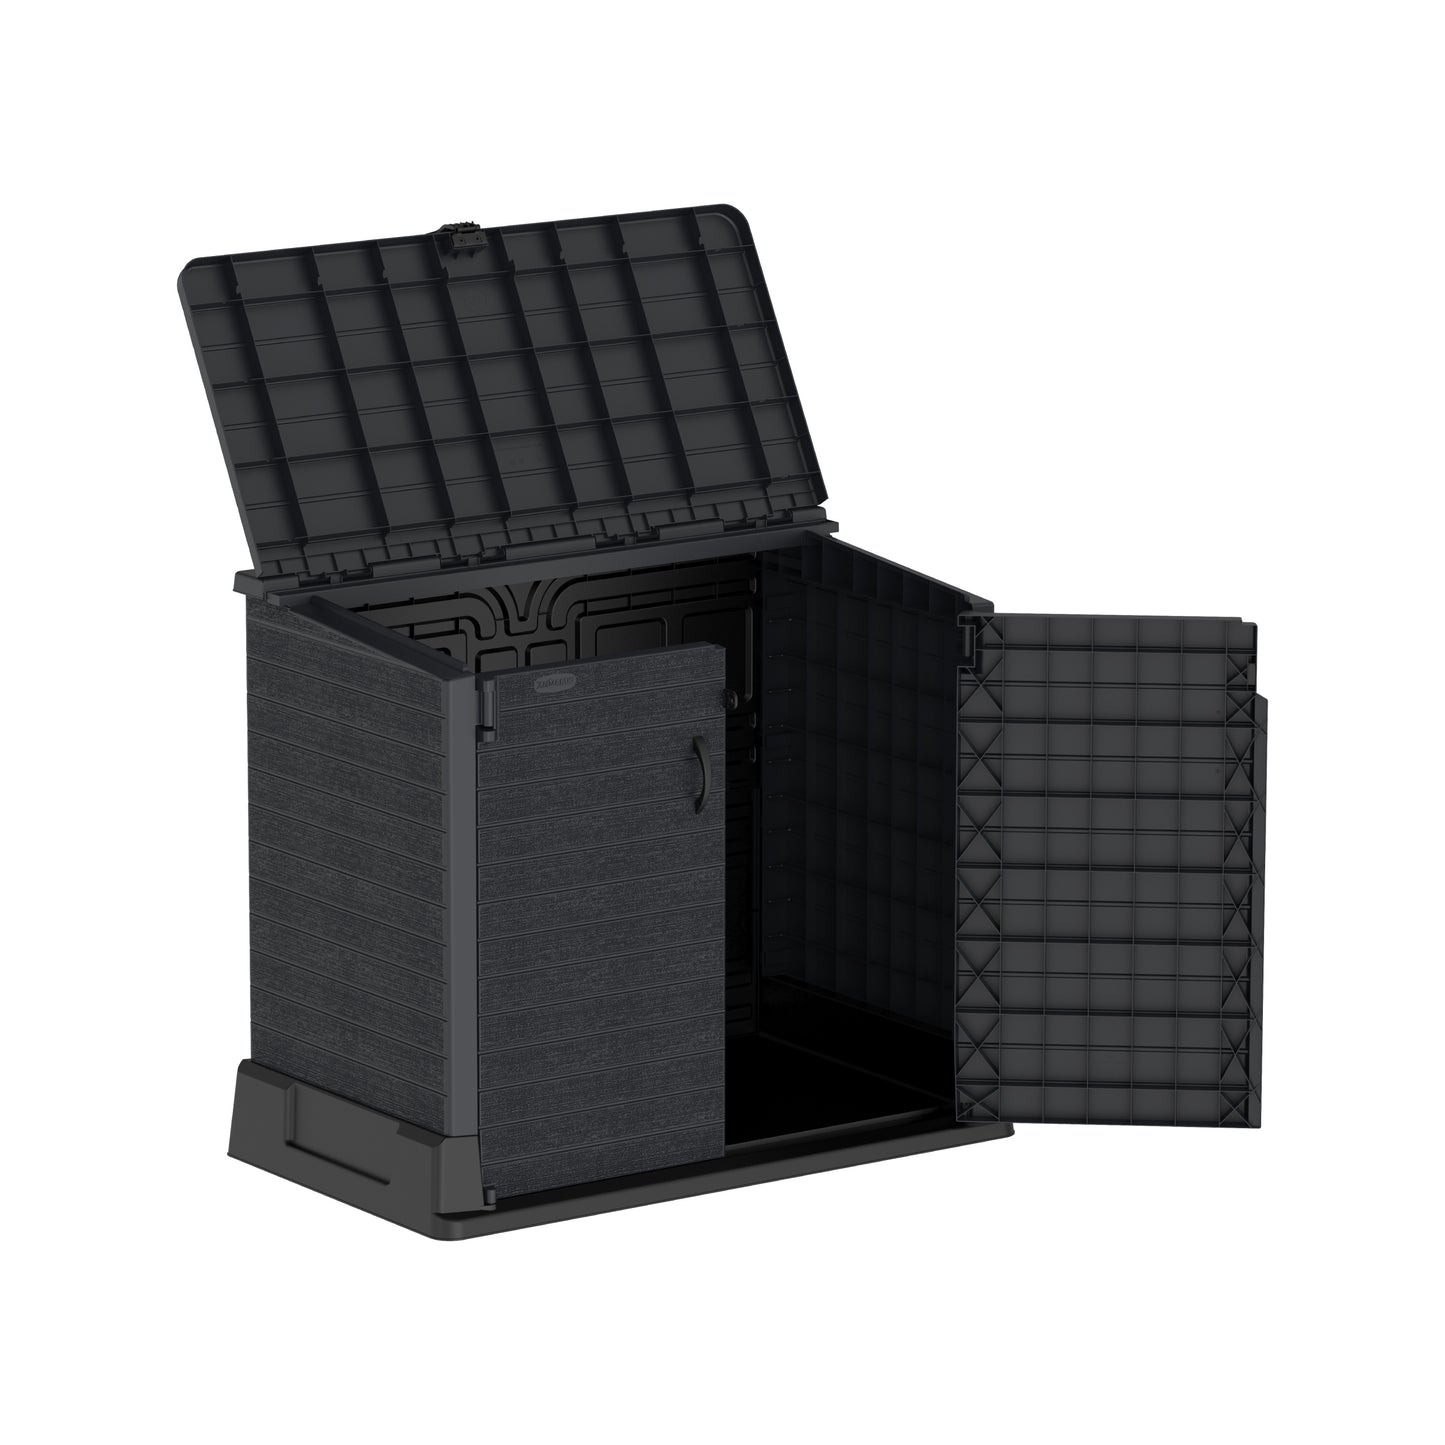 Dark grey plastic storage shed for yard with front and top entry doors for easy access for storing equipment.